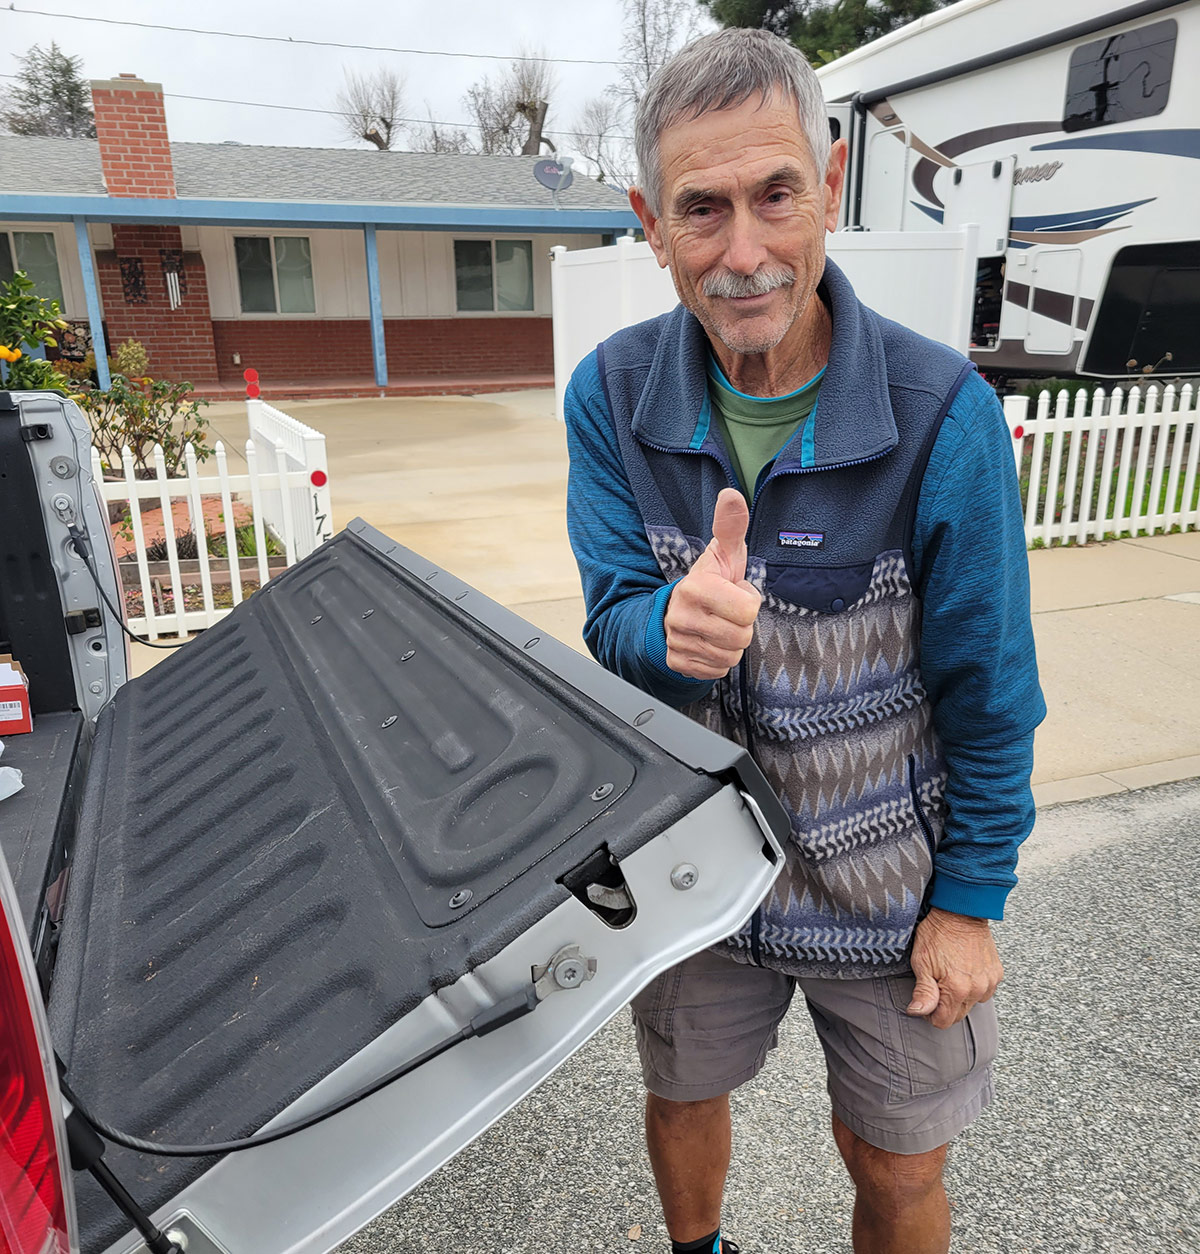 A portrait photograph of a man in a blue Patagonia jacket giving the thumbs up gesture grinning as the back bed/trunk door of the truck is open halfways on a gloomy cloudy day outside on a curb nearby a house and parked RV in the front yard